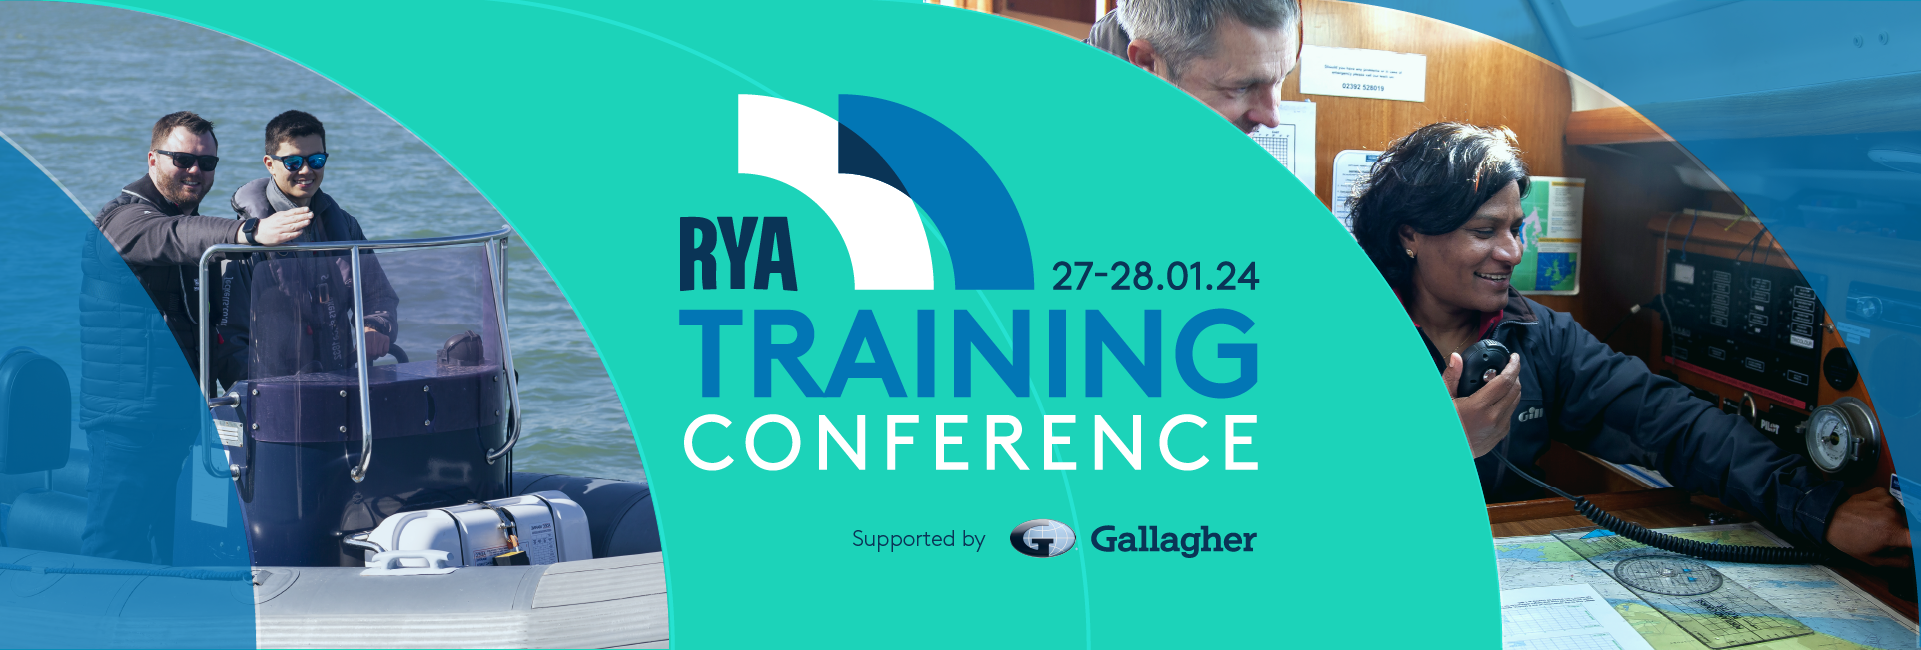 RYA training conference - be inspired!